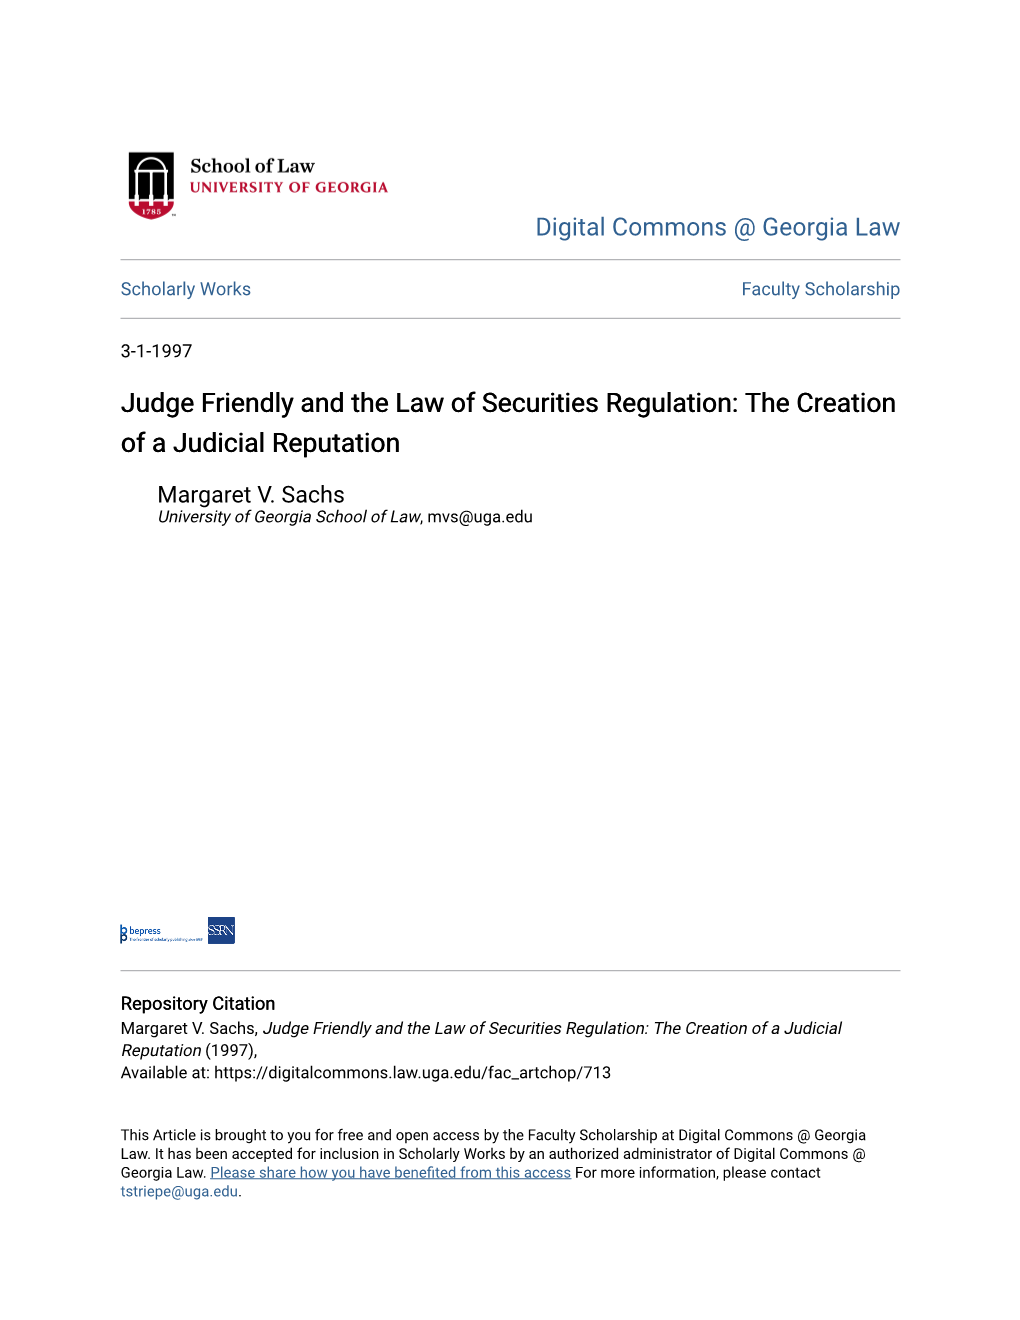 Judge Friendly and the Law of Securities Regulation: the Creation of a Judicial Reputation